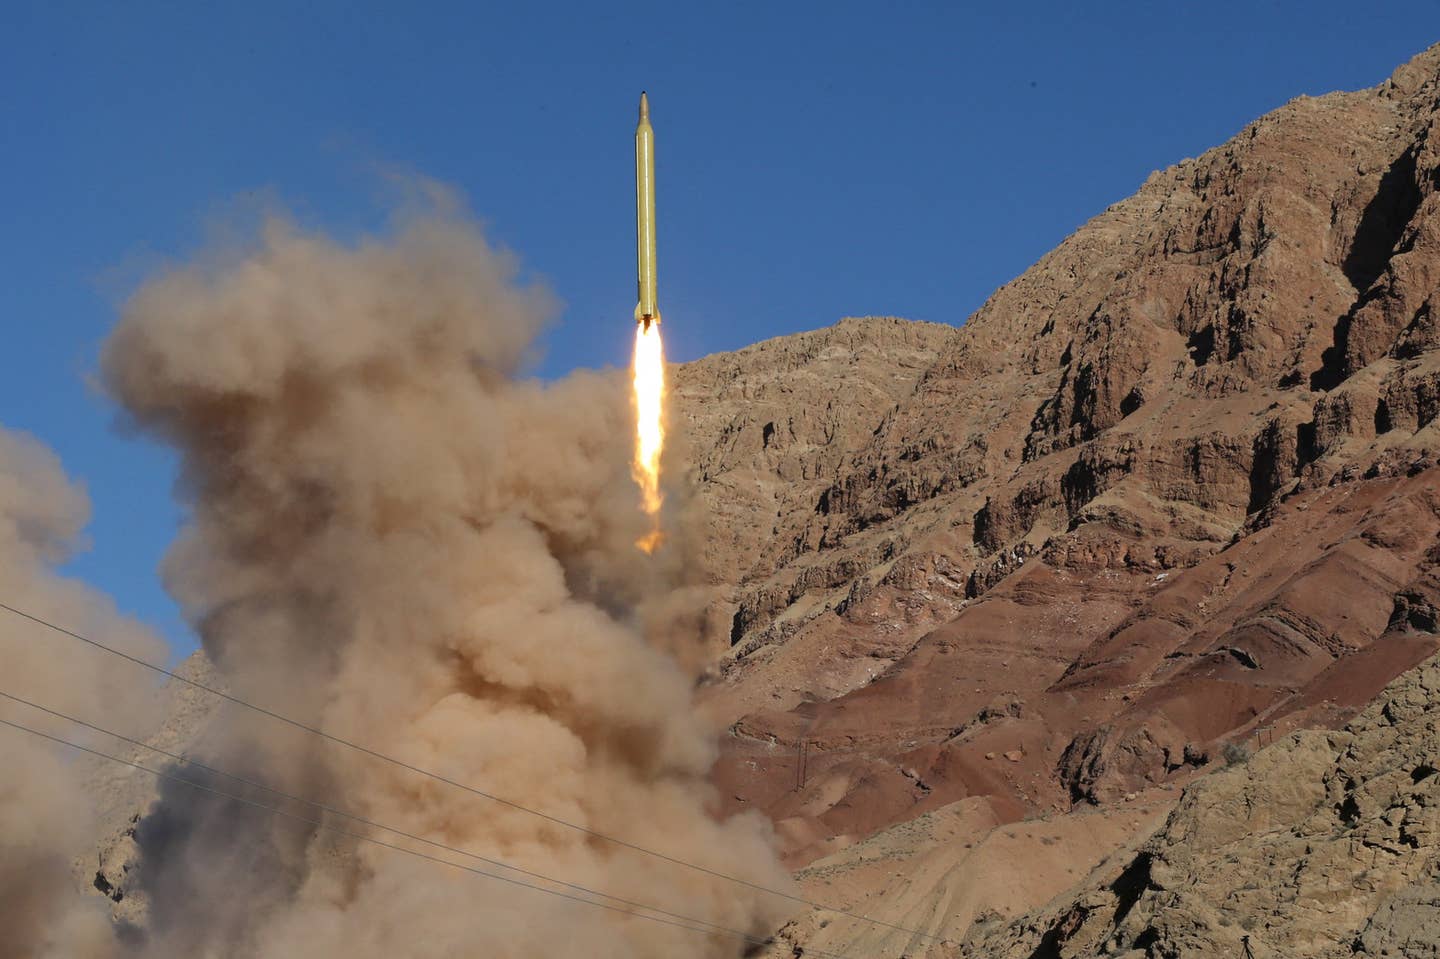 An Iranian Ghadr ballistic missile is launched during a test in northern Iran on March 9, 2016. <em>Photo by MAHMOOD HOSSEINI/TASNIM NEWS/AFP via Getty Images</em>